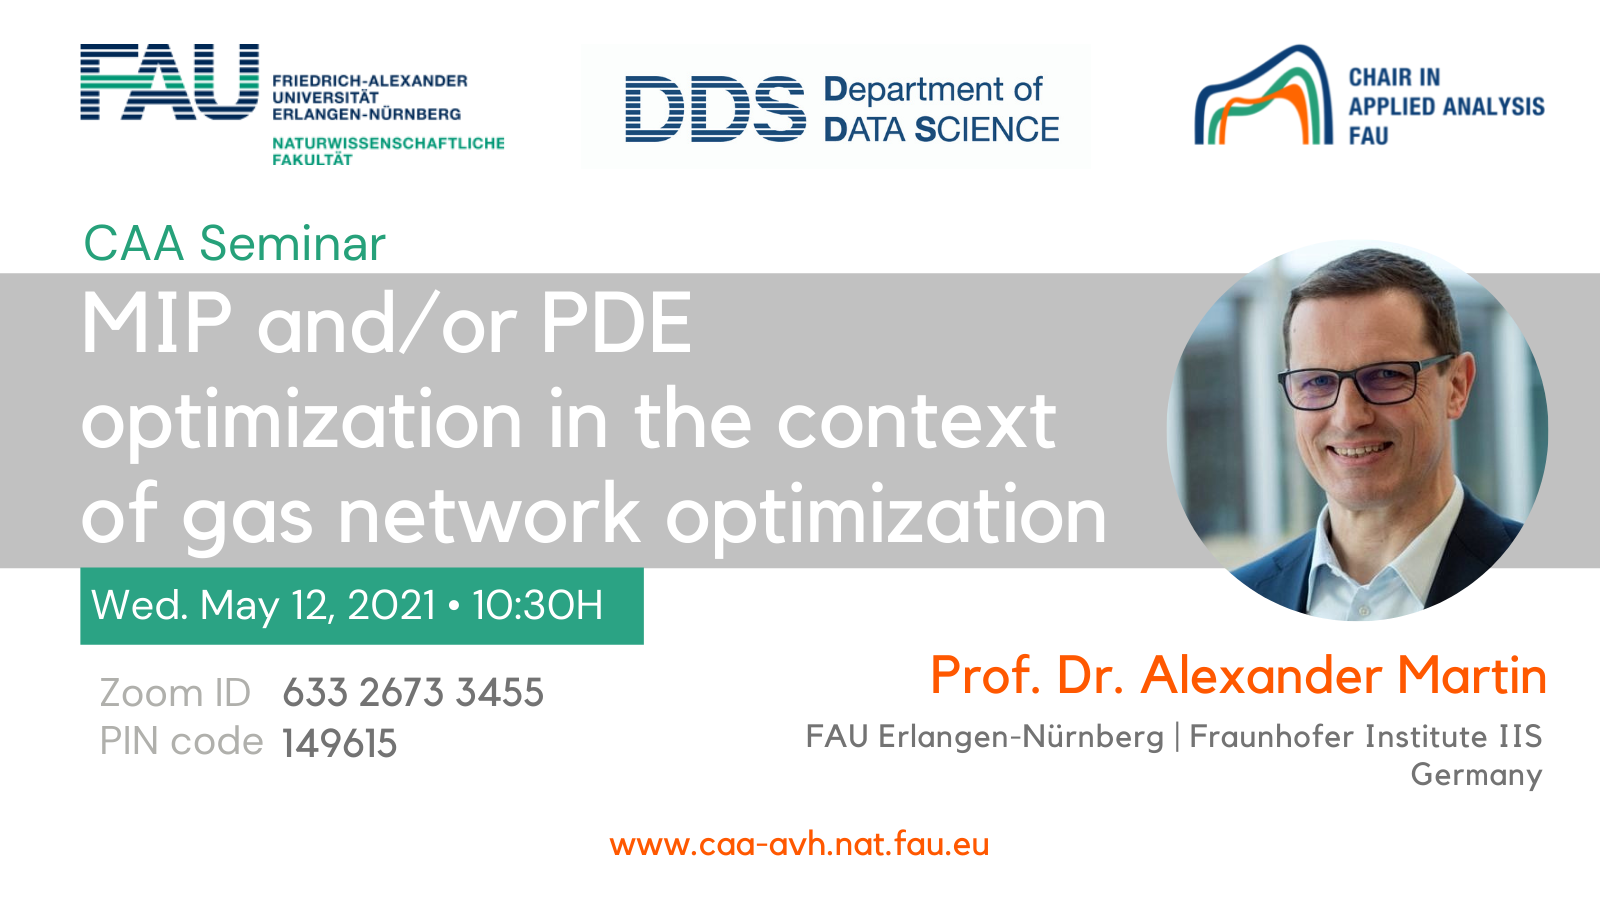 MIP and/or PDE optimization in the context of gas network optimization